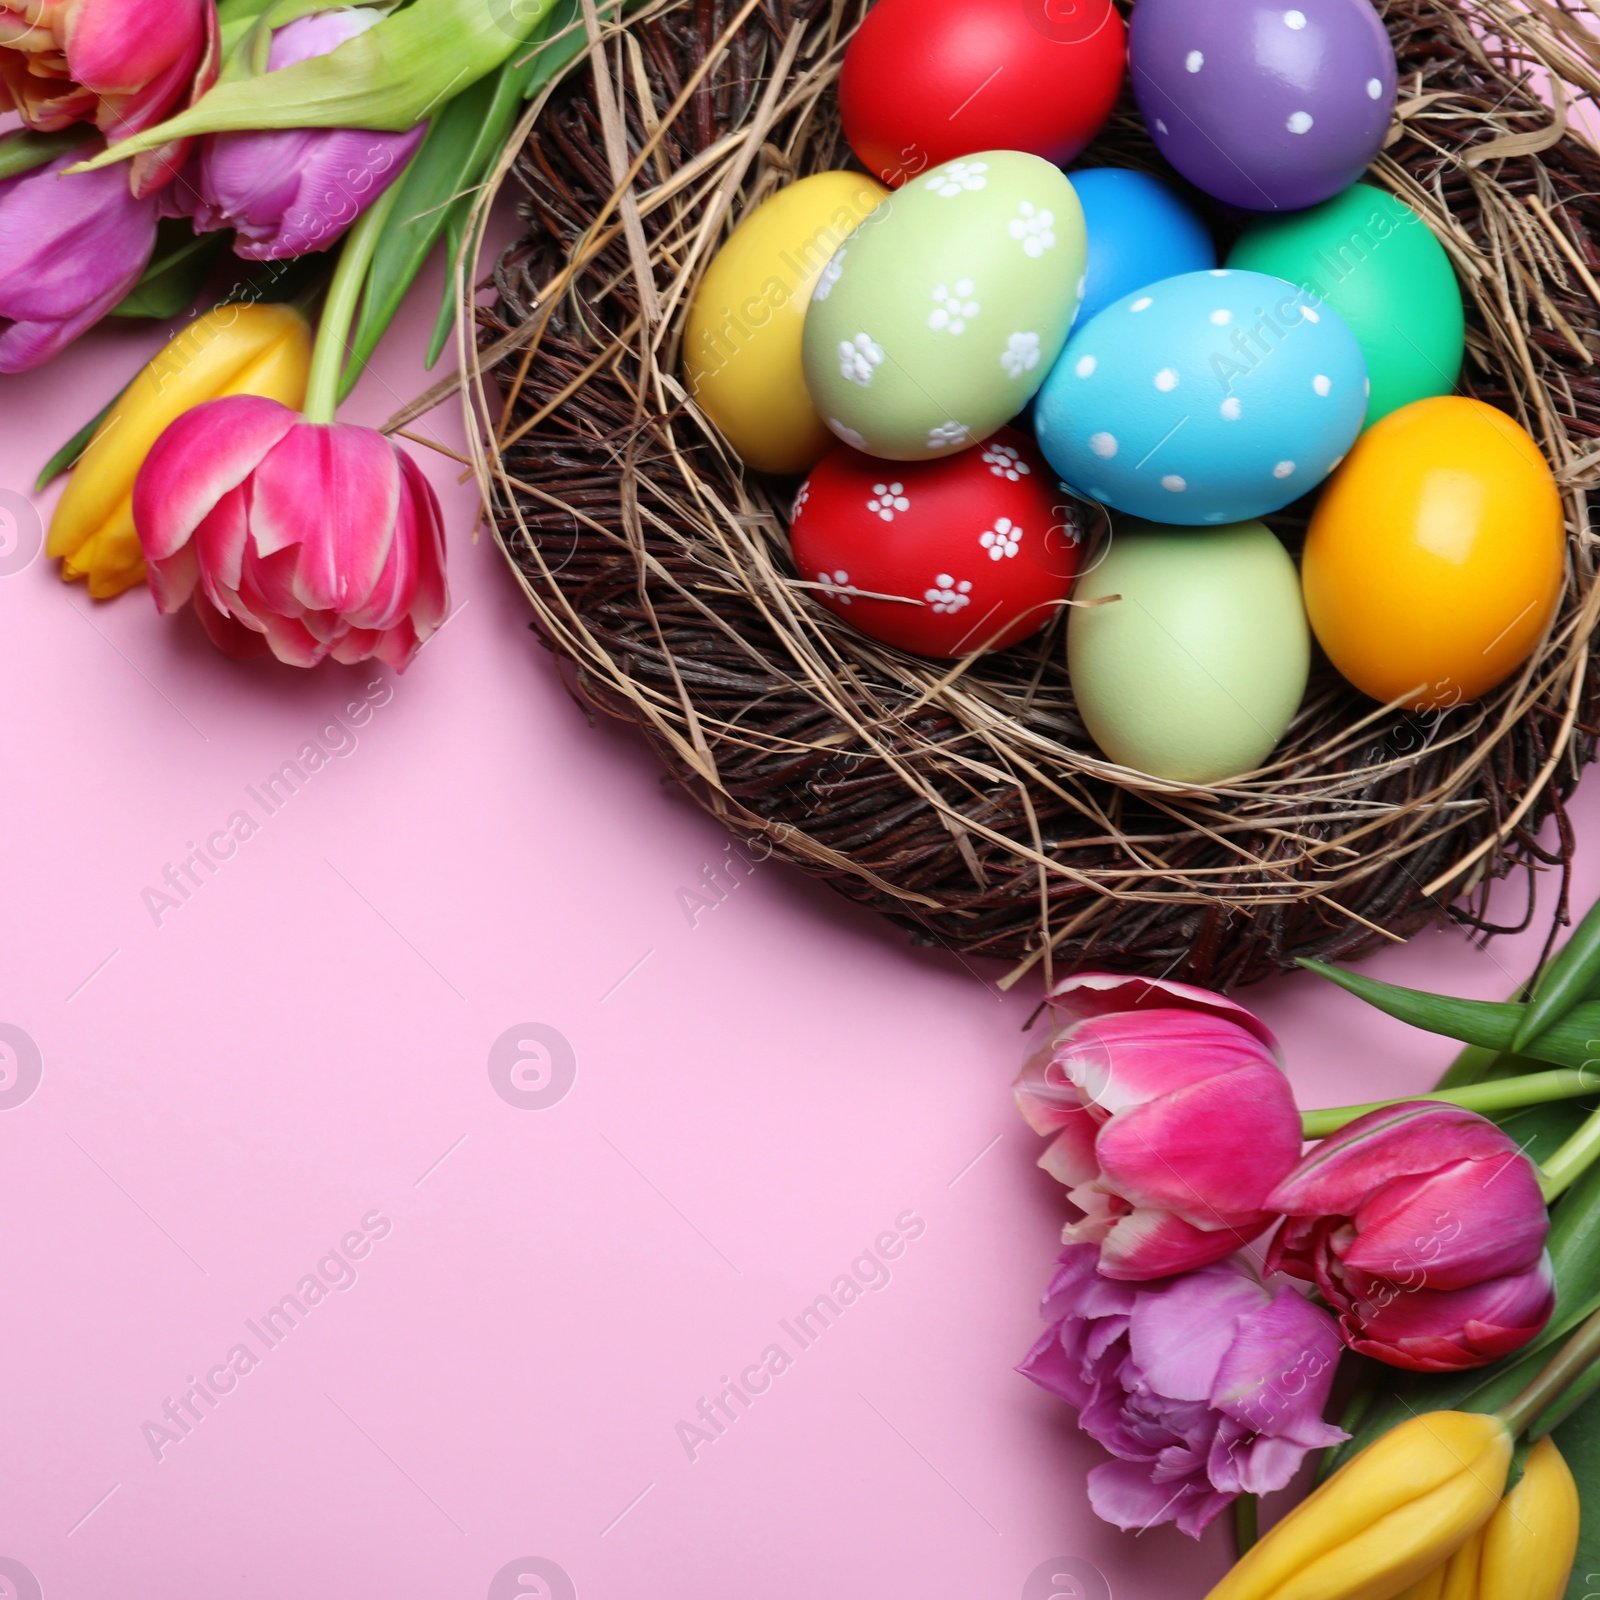 Photo of Bright painted eggs and spring tulips on pink background, flat lay with space for text. Happy Easter